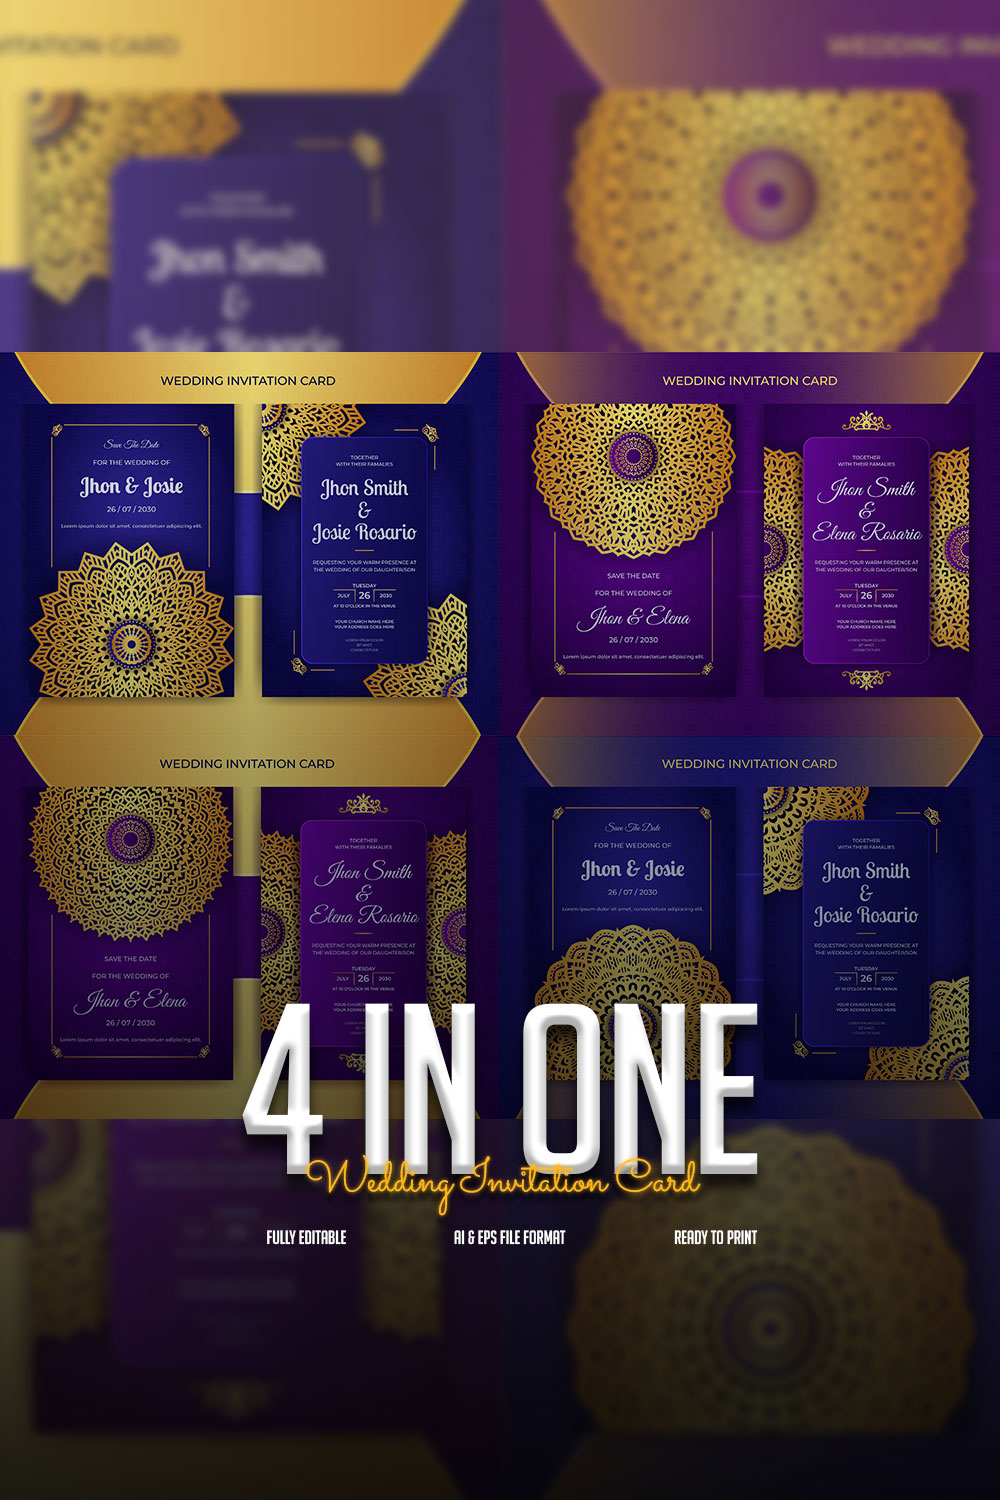 4 In One Luxury Colorful Wedding Invitation Card Only In $7 pinterest image.